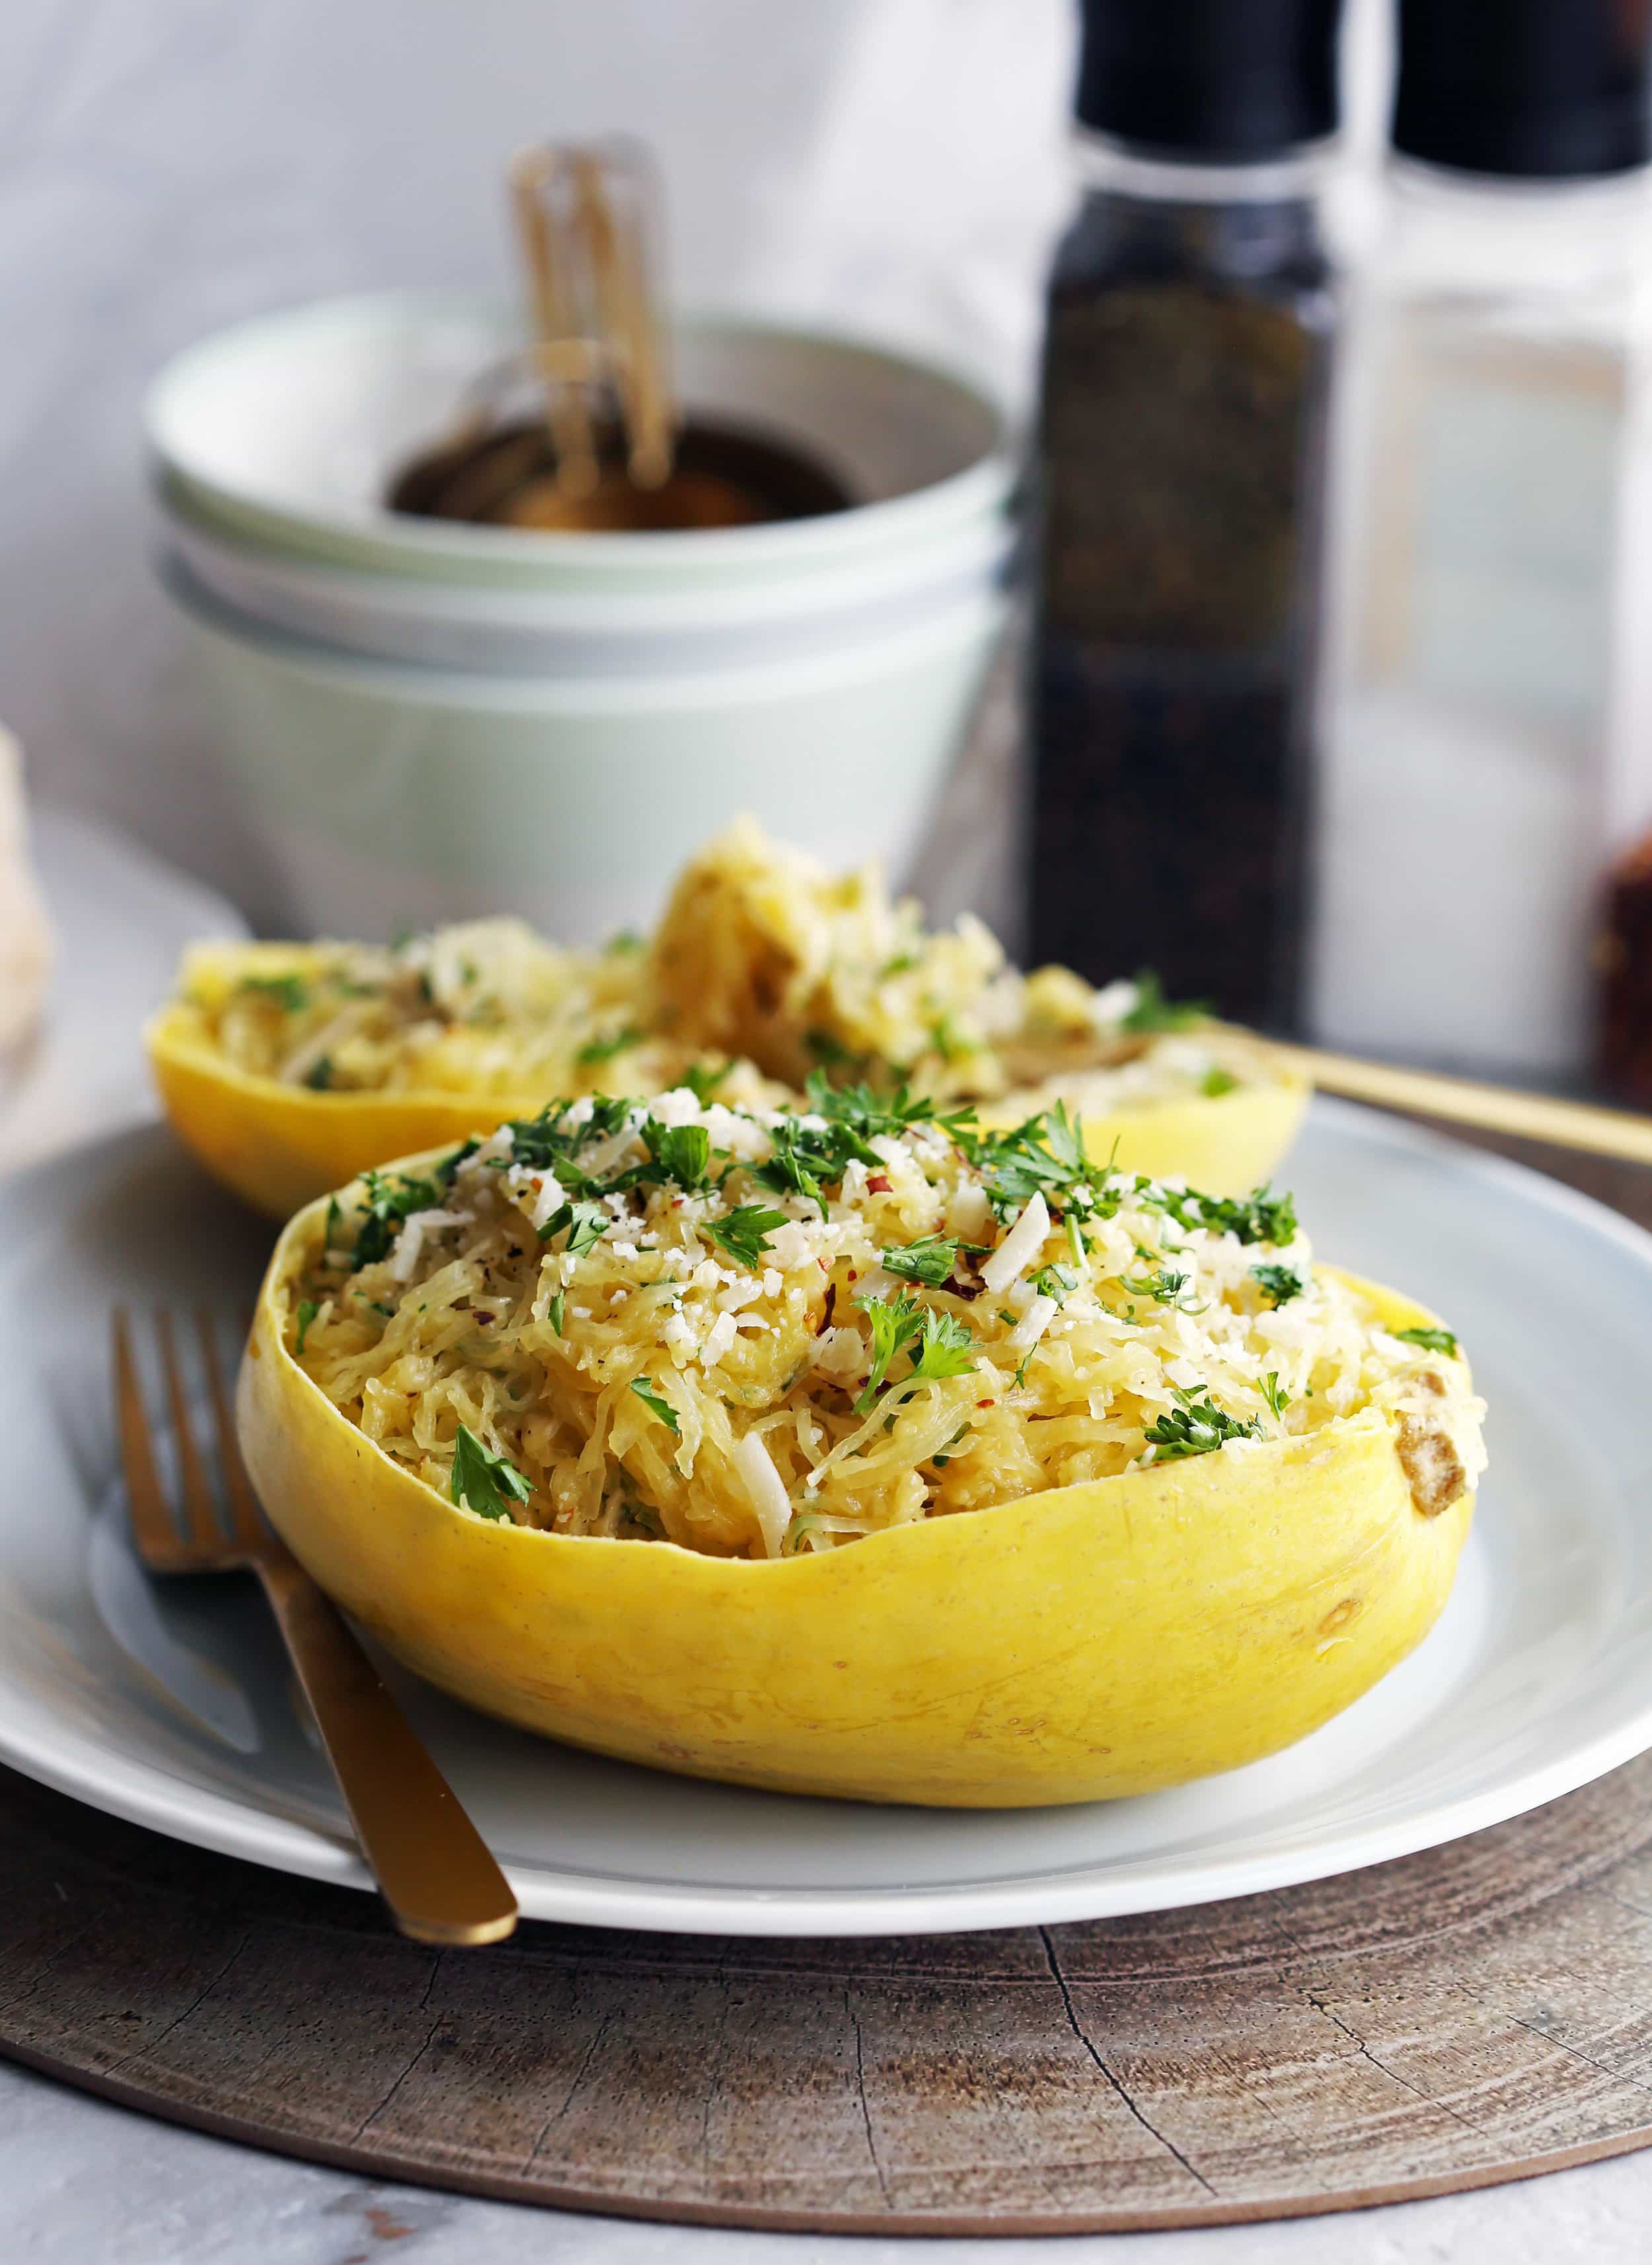 Instant Pot Garlic Parmesan Spaghetti Squash placed in a halved hollowed spaghetti squash shell (skin) with a fork on the side.